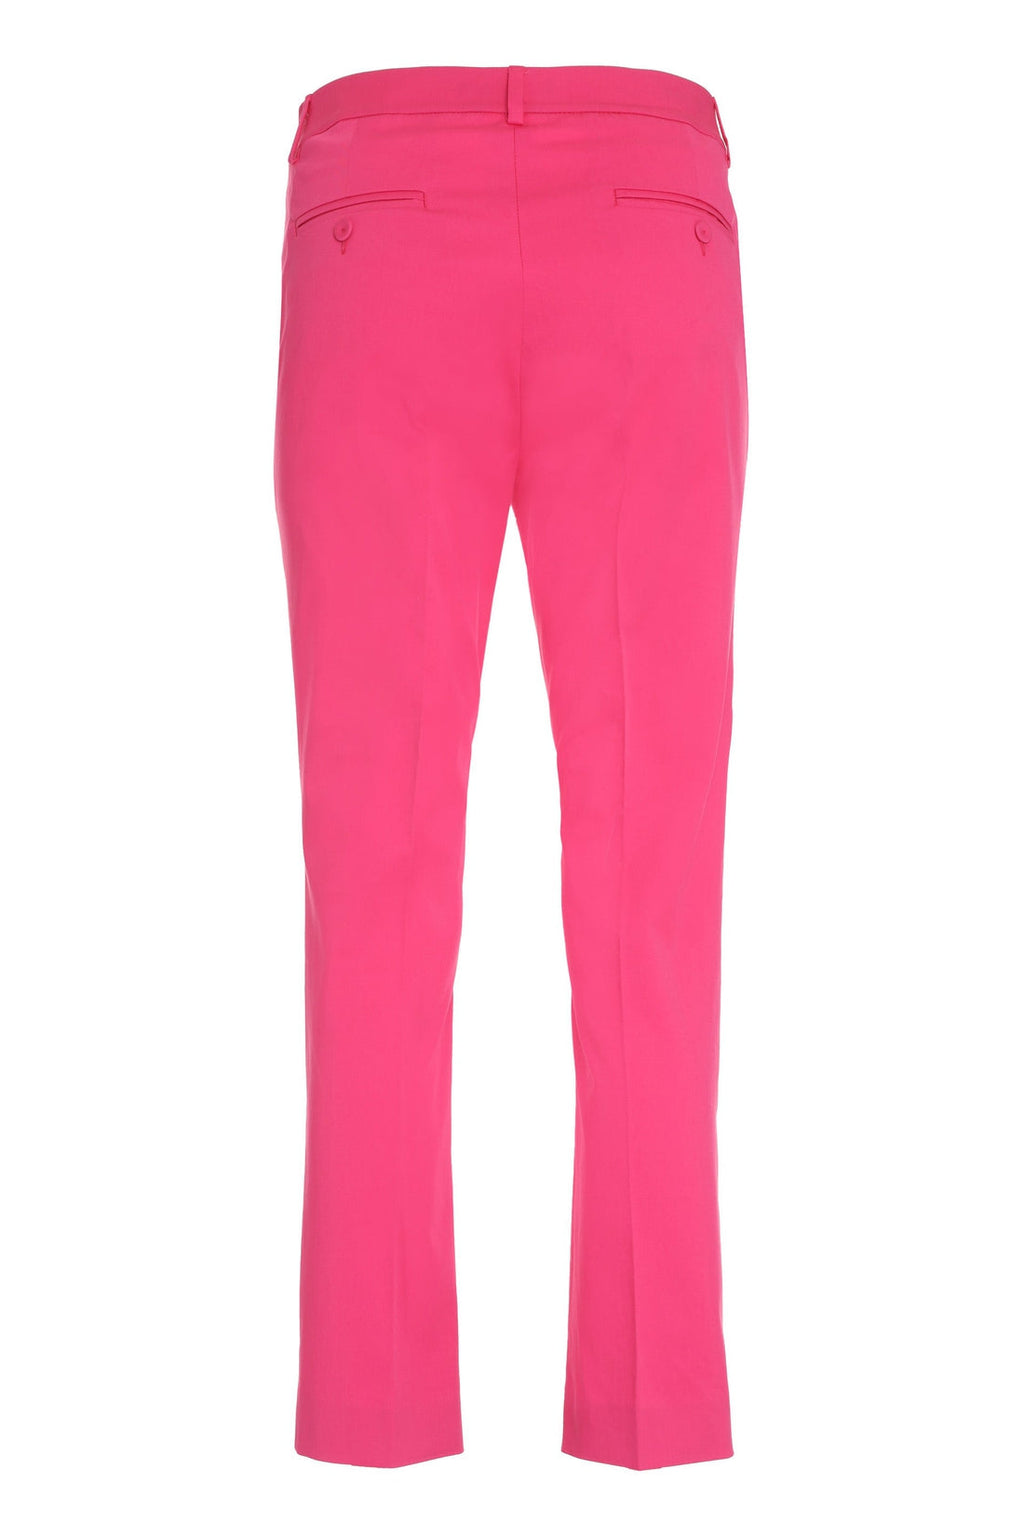 Weekend Max Mara-OUTLET-SALE-Cecco straight-leg trousers-ARCHIVIST